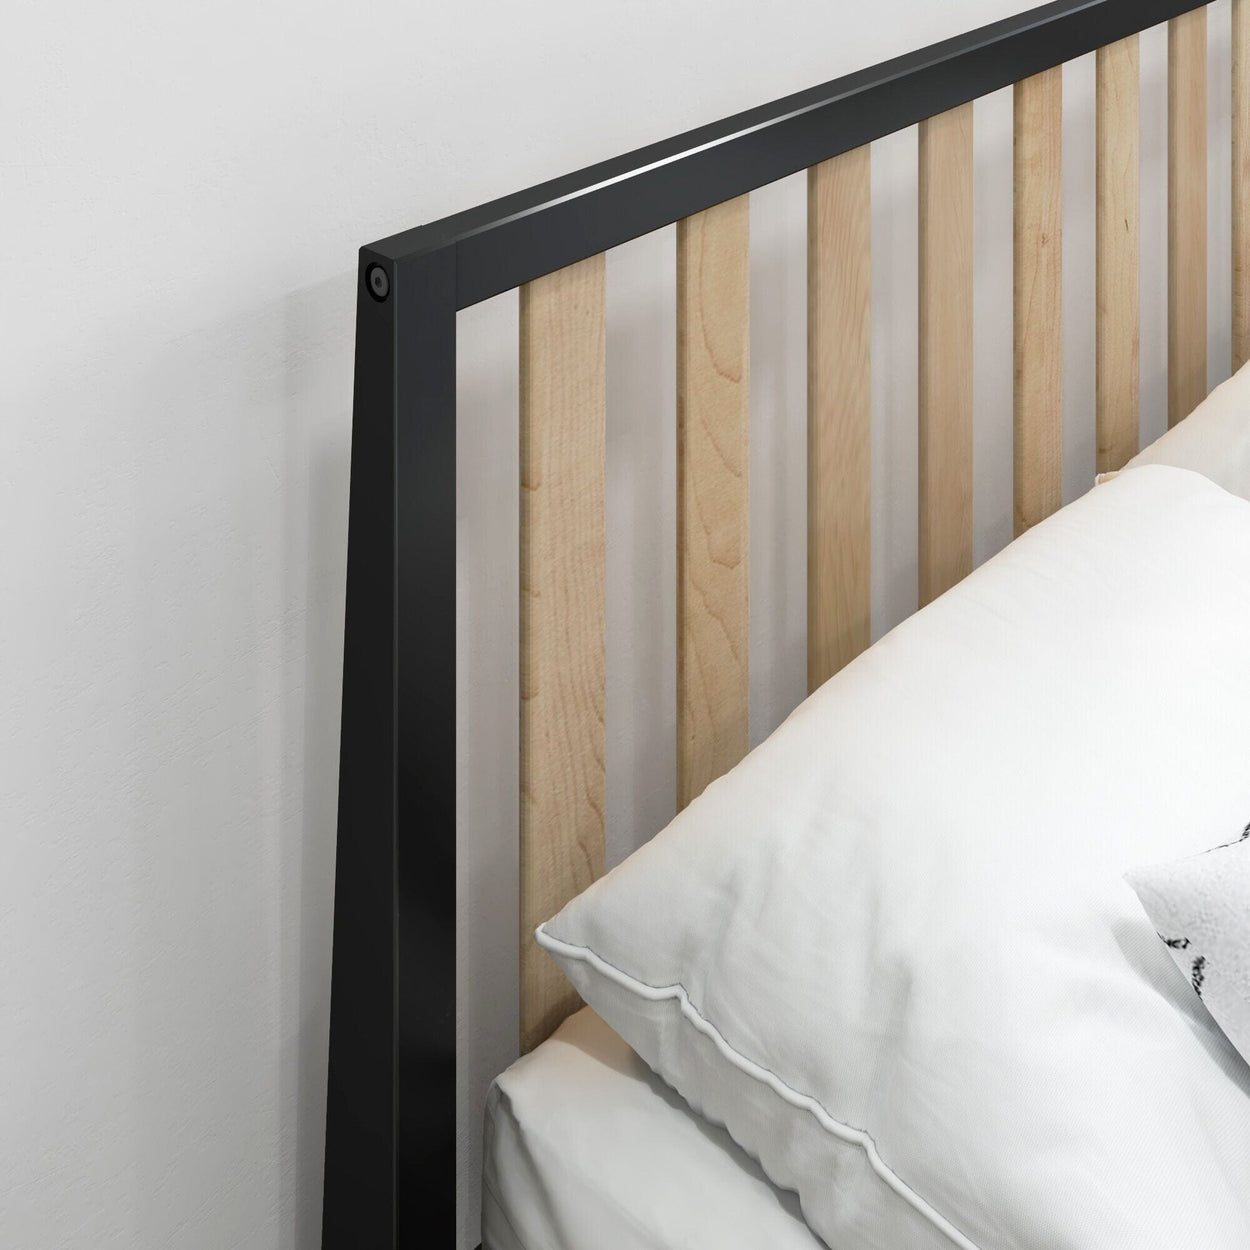 Modern Solid Wood Full Size Bed with Slatted Headboard Single Beds Plank+Beam 